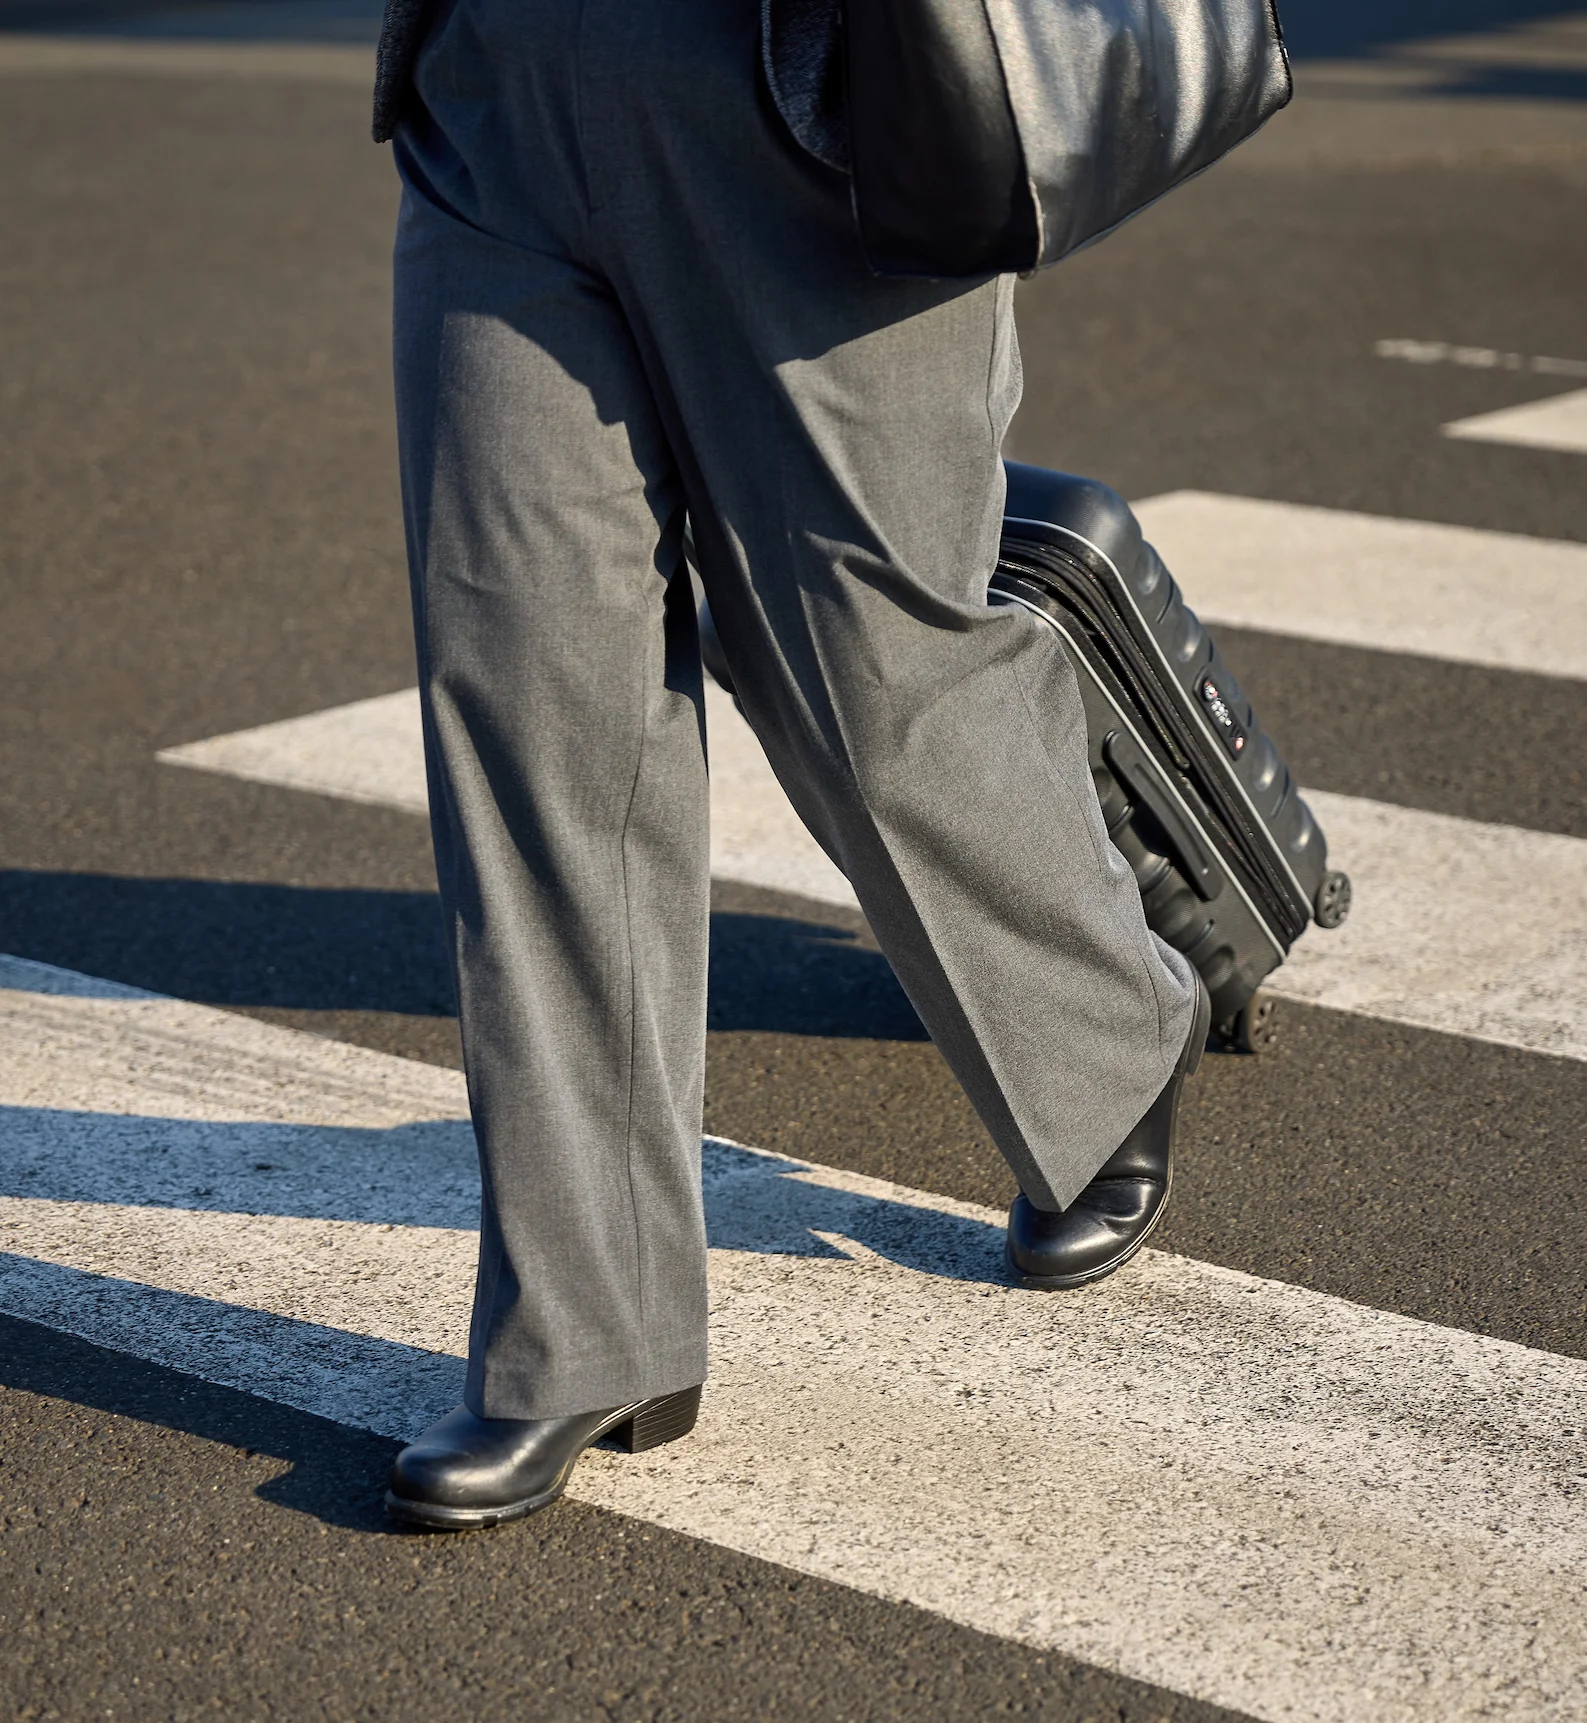 A business person walks across a zebra crossing with a suitcase